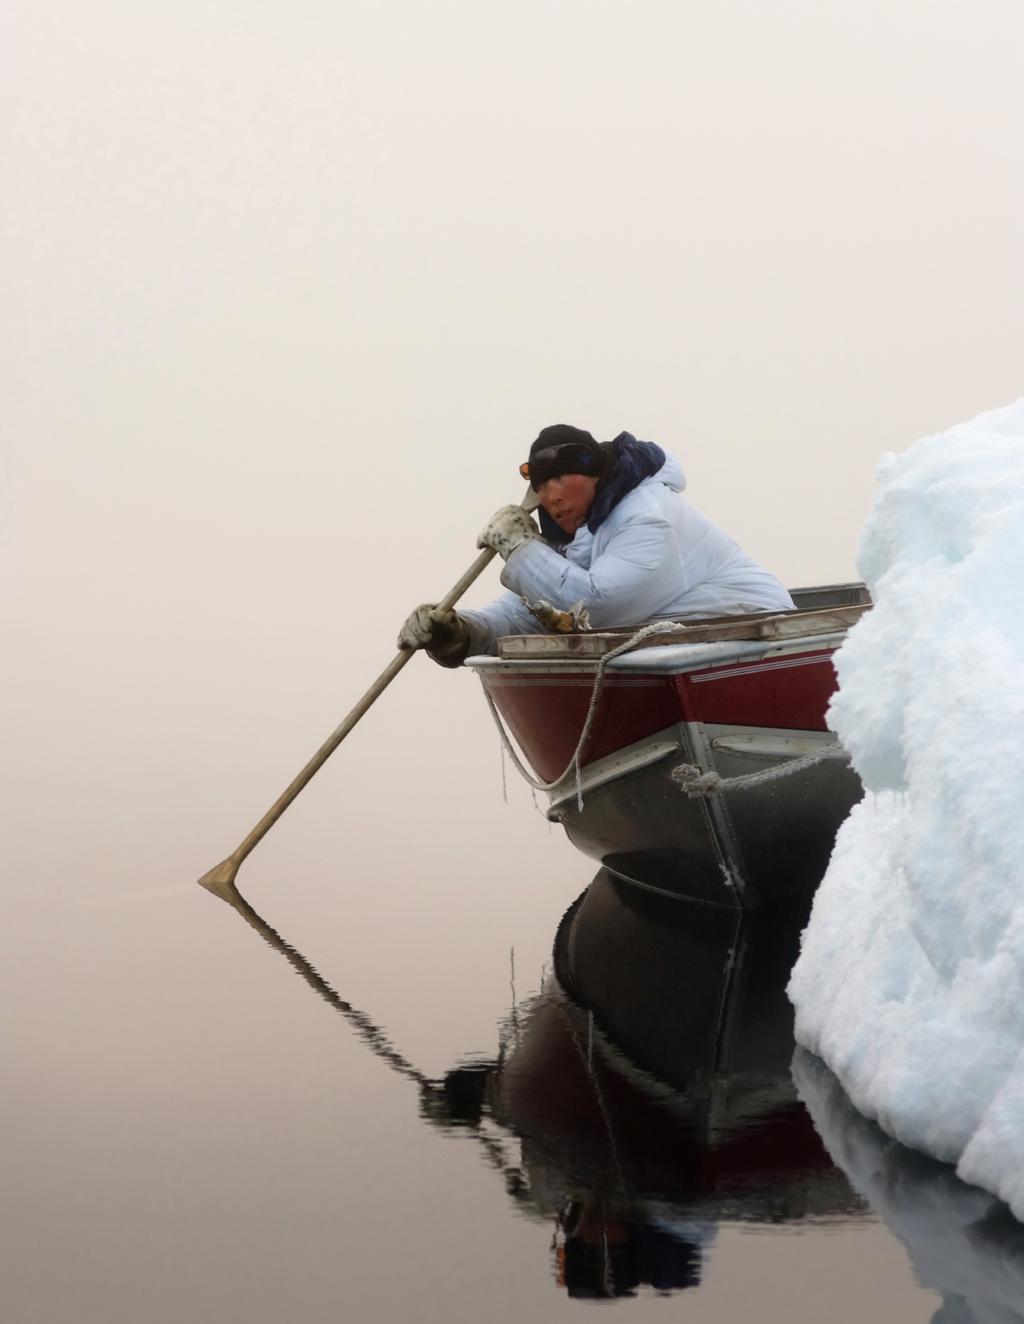 Steven Kazlowski/Getty Images An Inupiat hunter uses a wooden oar to